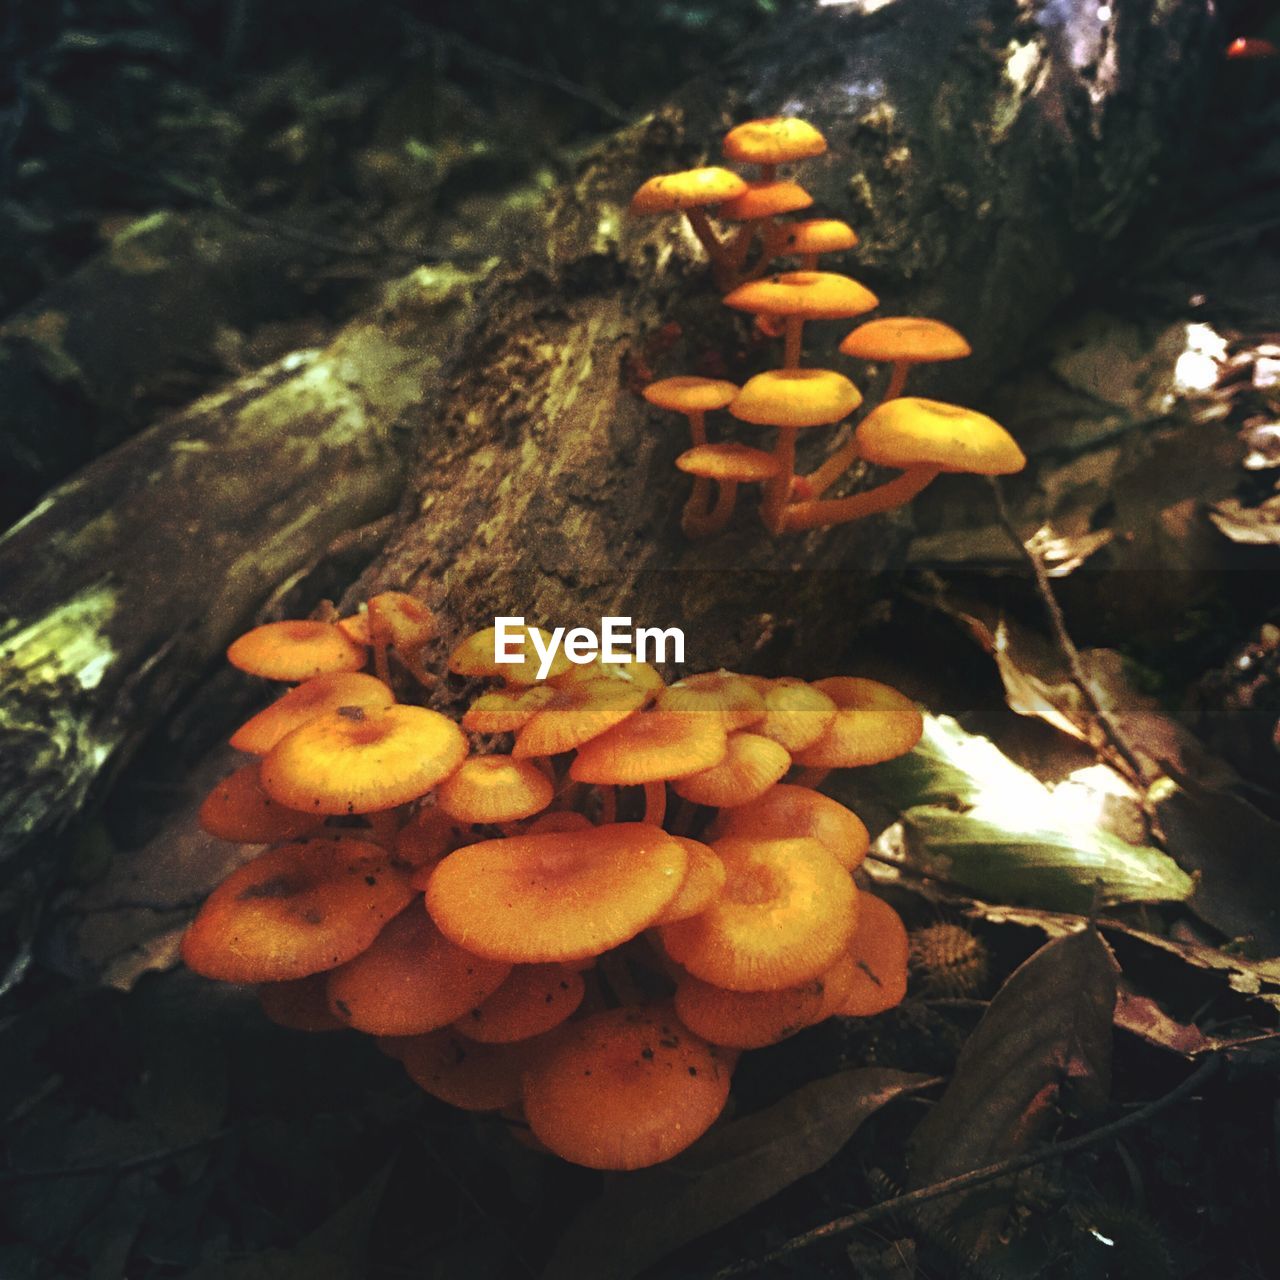 CLOSE-UP OF MUSHROOMS GROWING ON TREE TRUNK IN FOREST